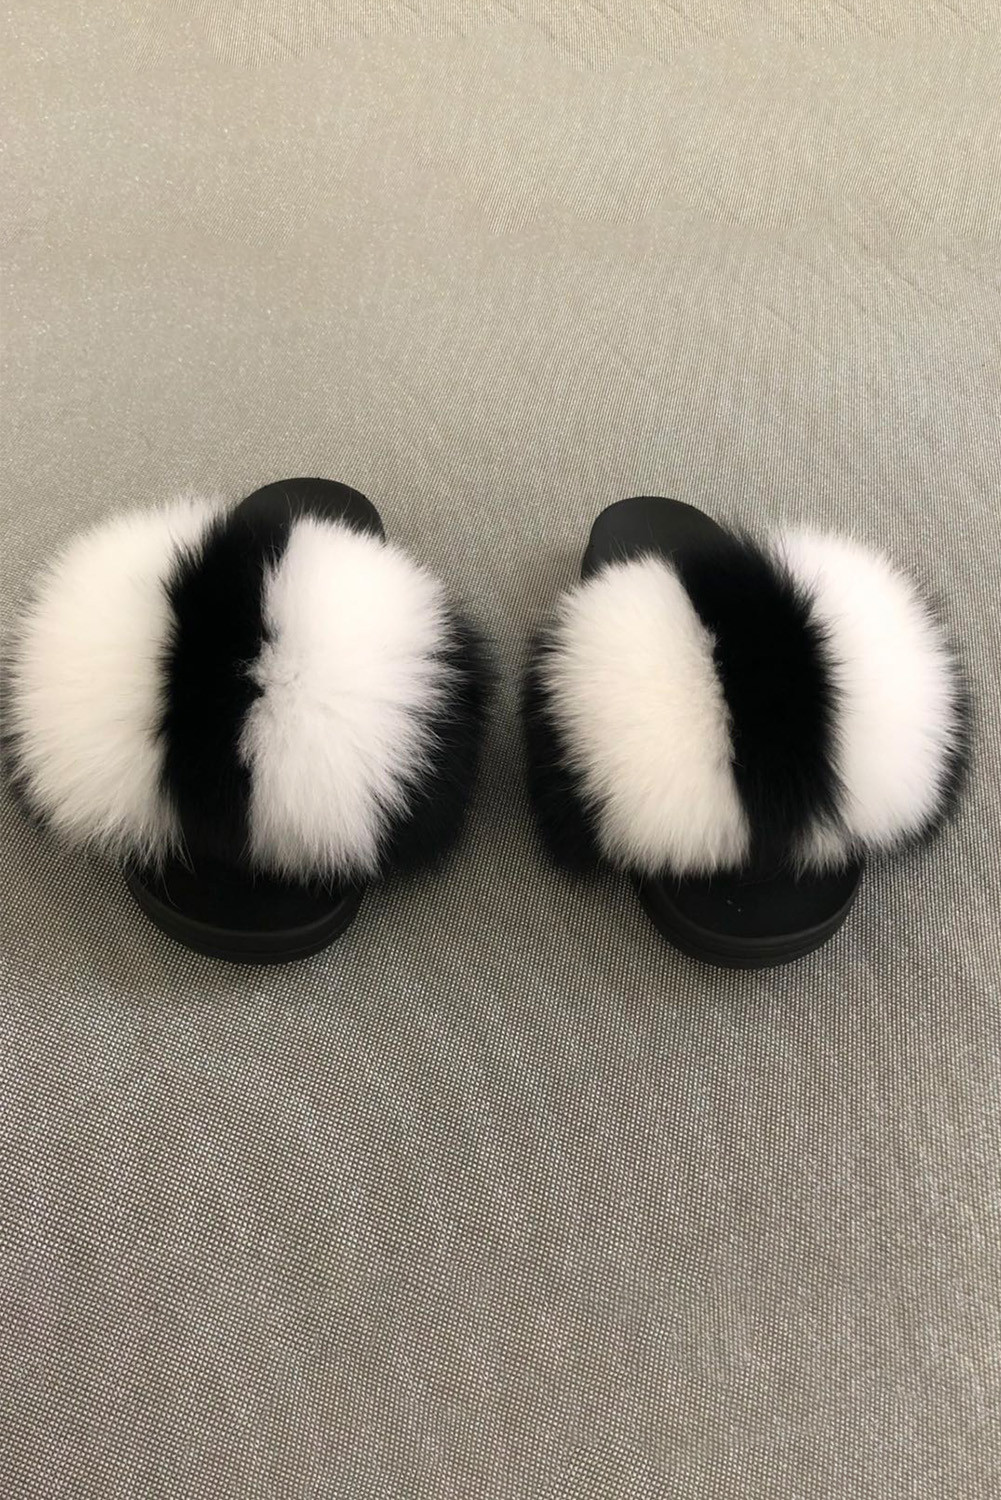 US$ 13.2 Black White Colored Fluffy Slippers Wholesale